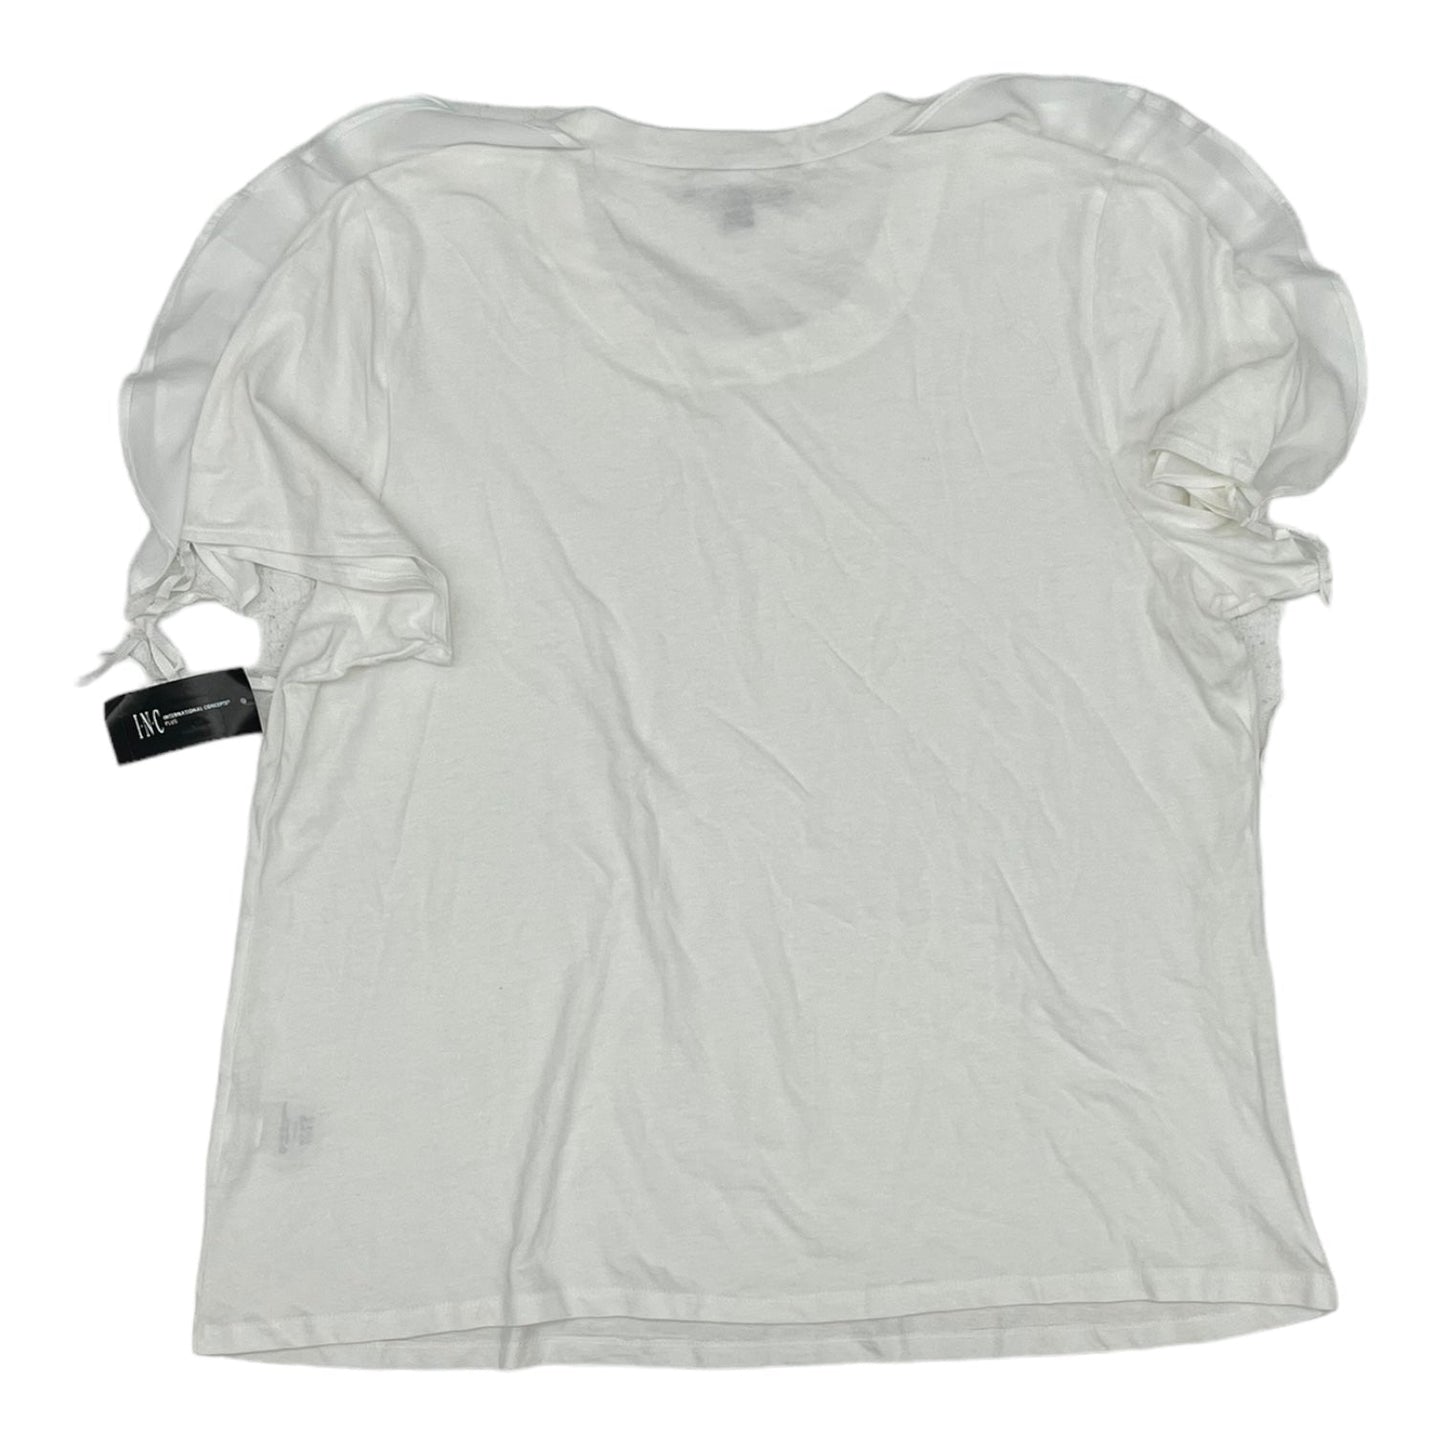 WHITE TOP SS by INC Size:1X